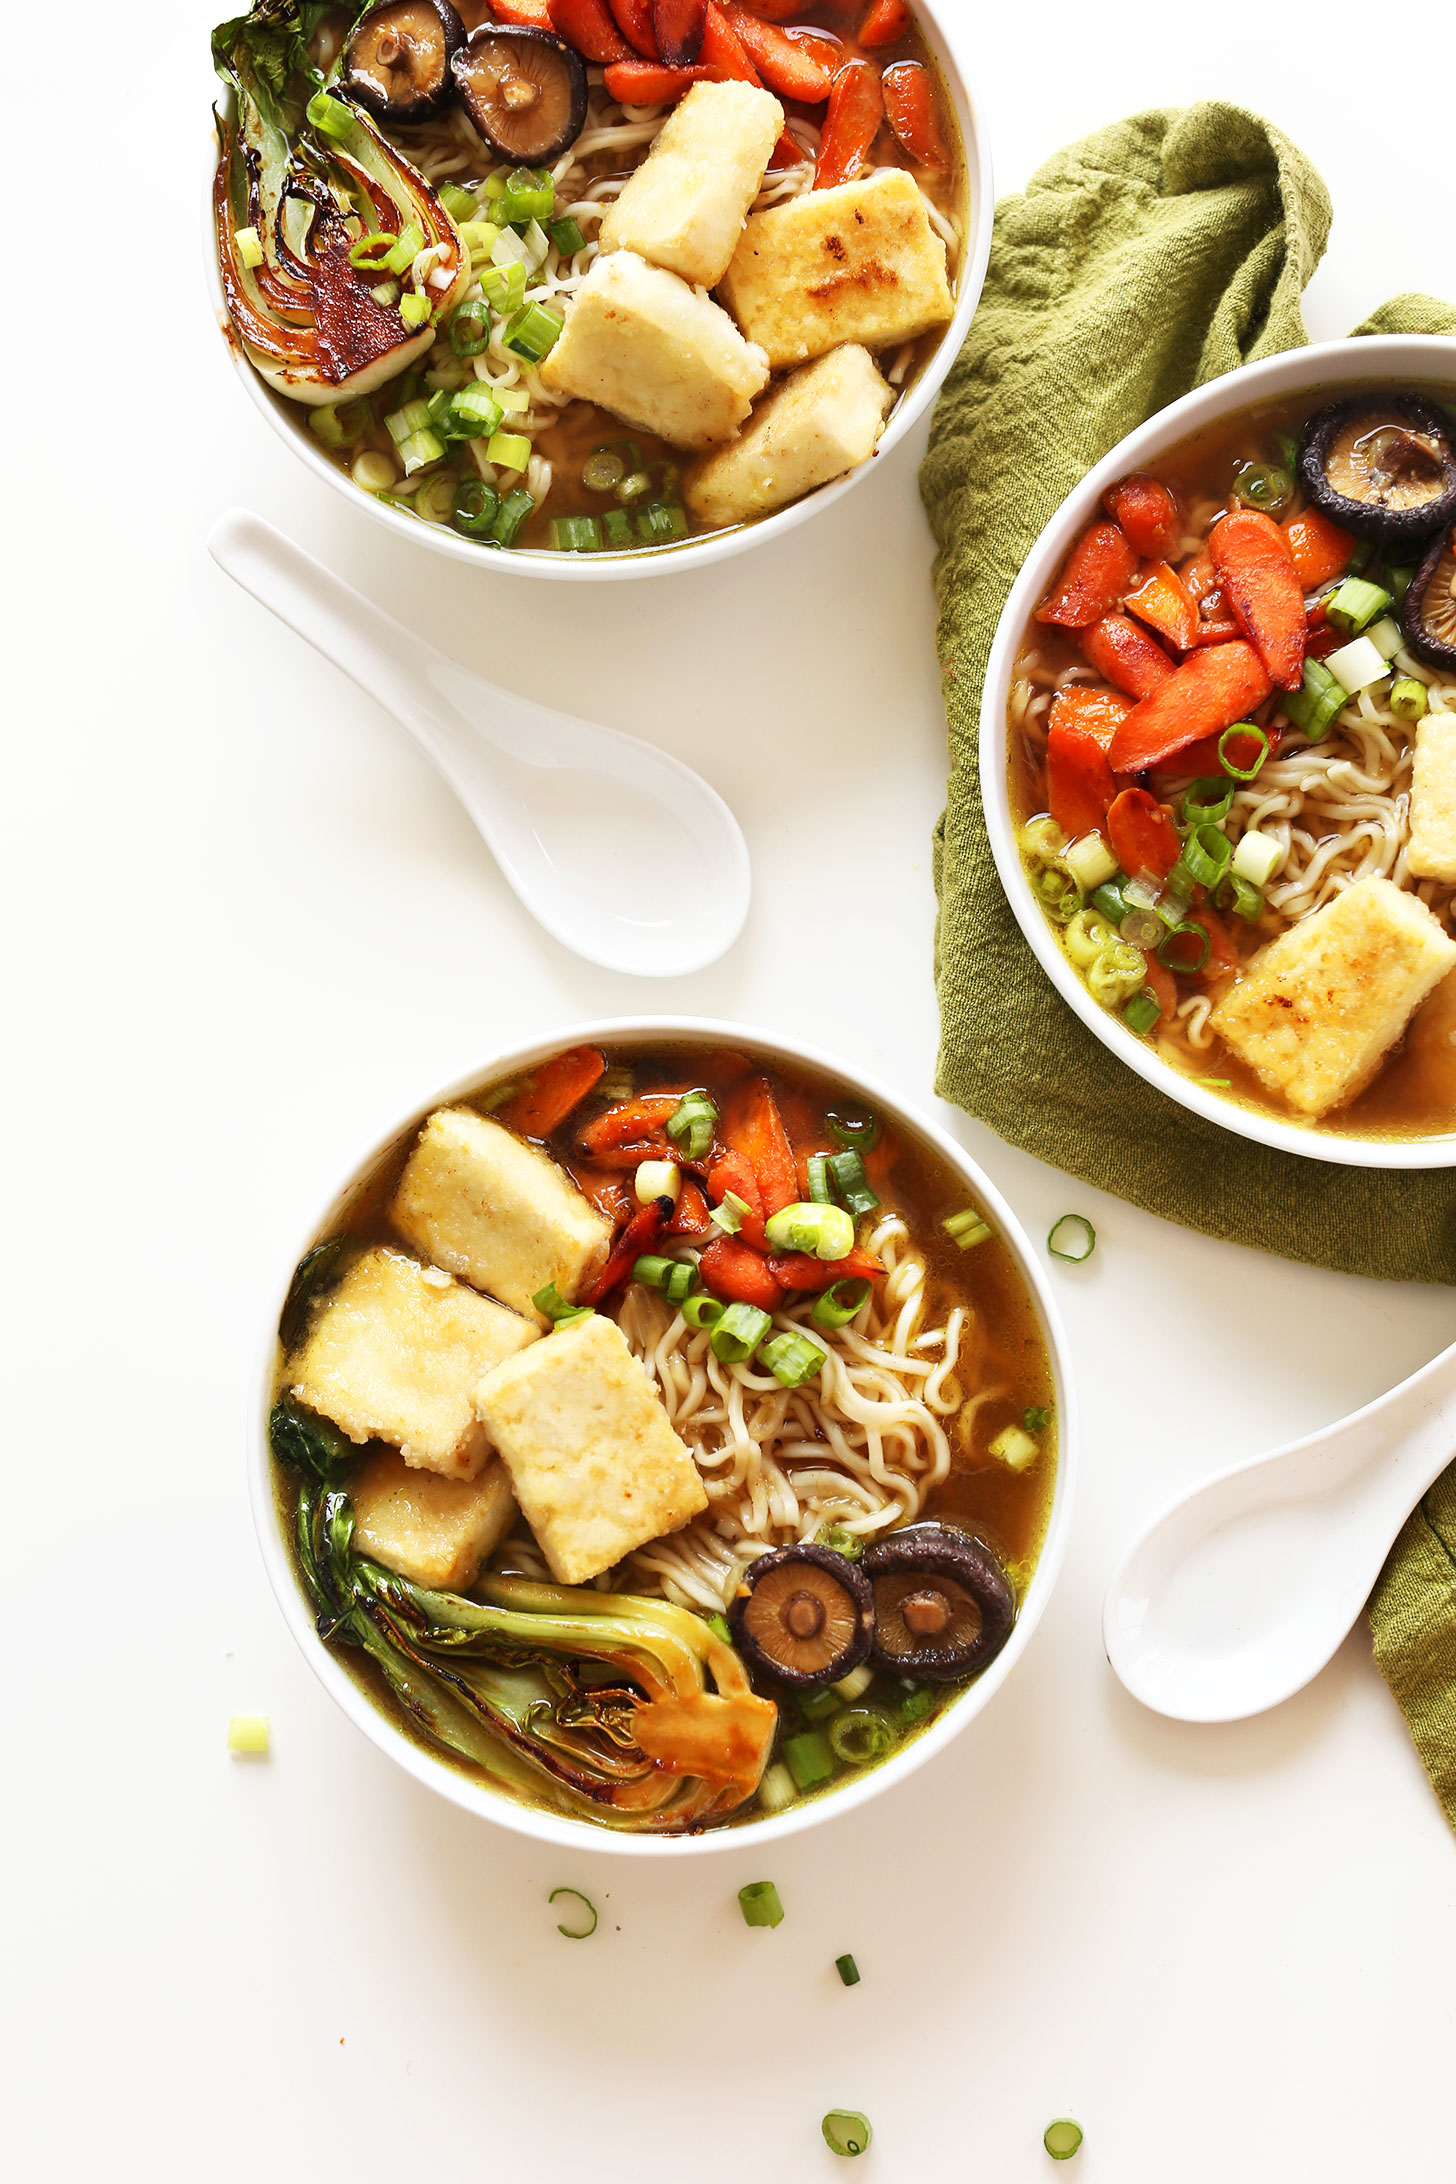 Dinner bowls filled with our vegan ramen recipe for a warm dinner meal